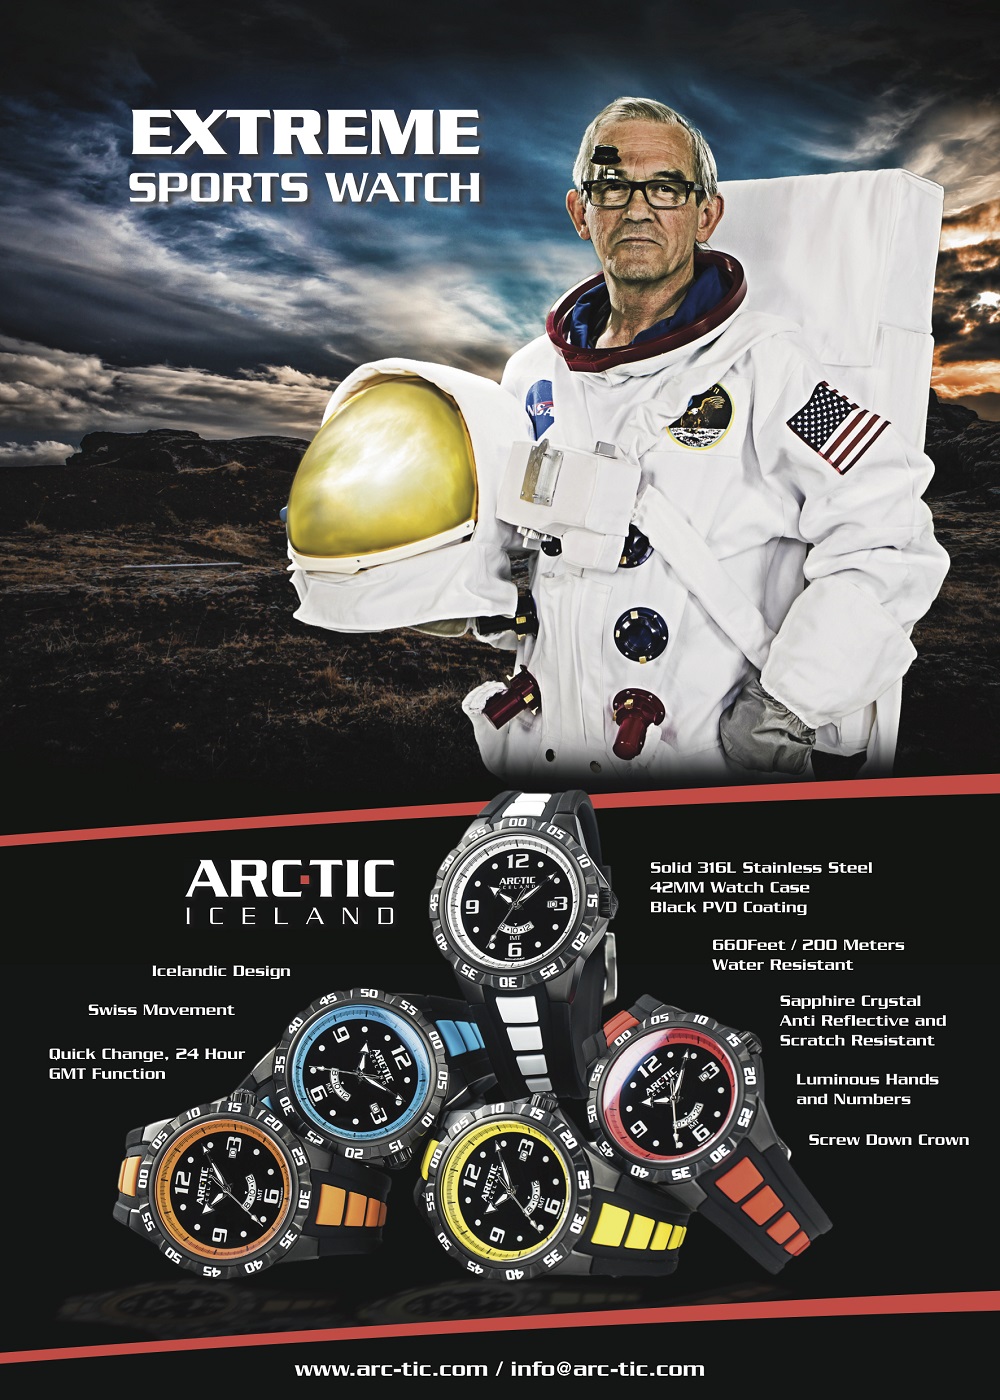 New Watch Brand Arc-Tic Out Of Iceland Watch Releases 